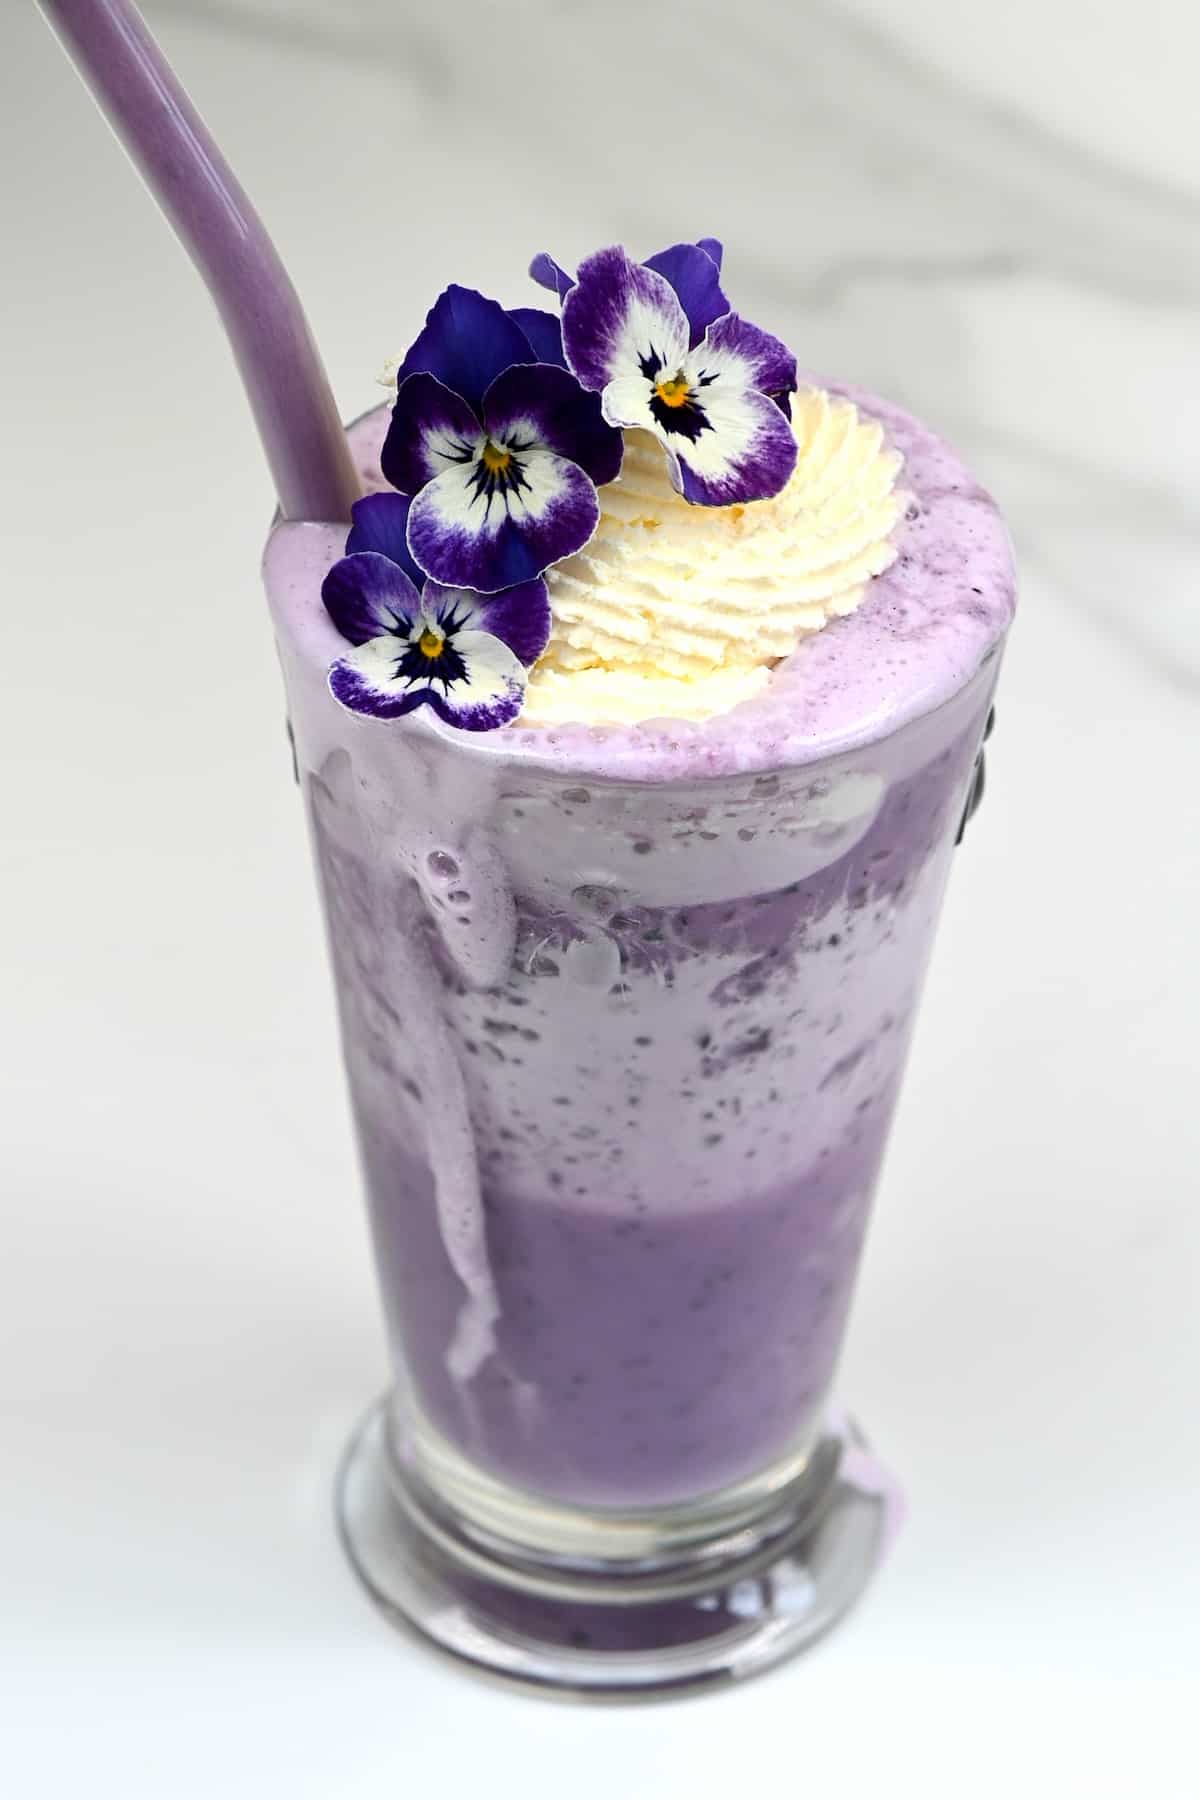 Blueberry ube shake with a straw and decorated with edible flowers